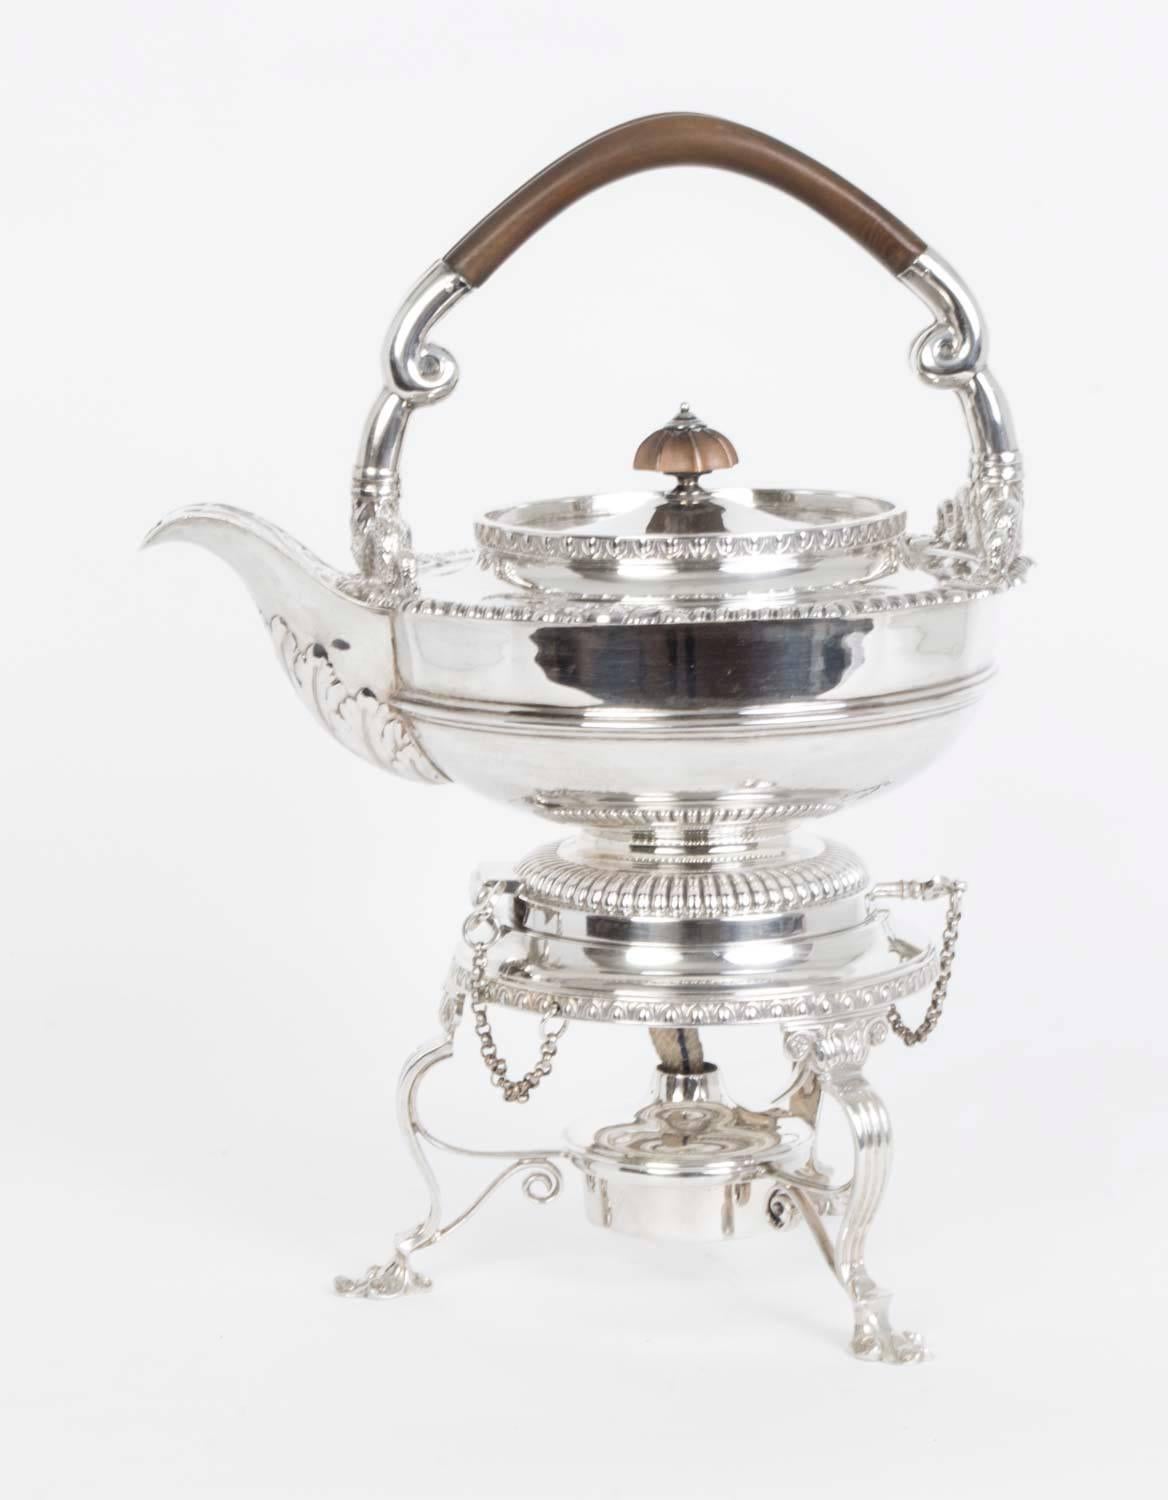 This is a wonderful antique English five-piece sterling silver tea and coffee set with kettle on stand, by the renowned Sheffield silversmith James Dixon & Sons and in the fabulous style of Paul Storr.

The set consists of:
The coffee